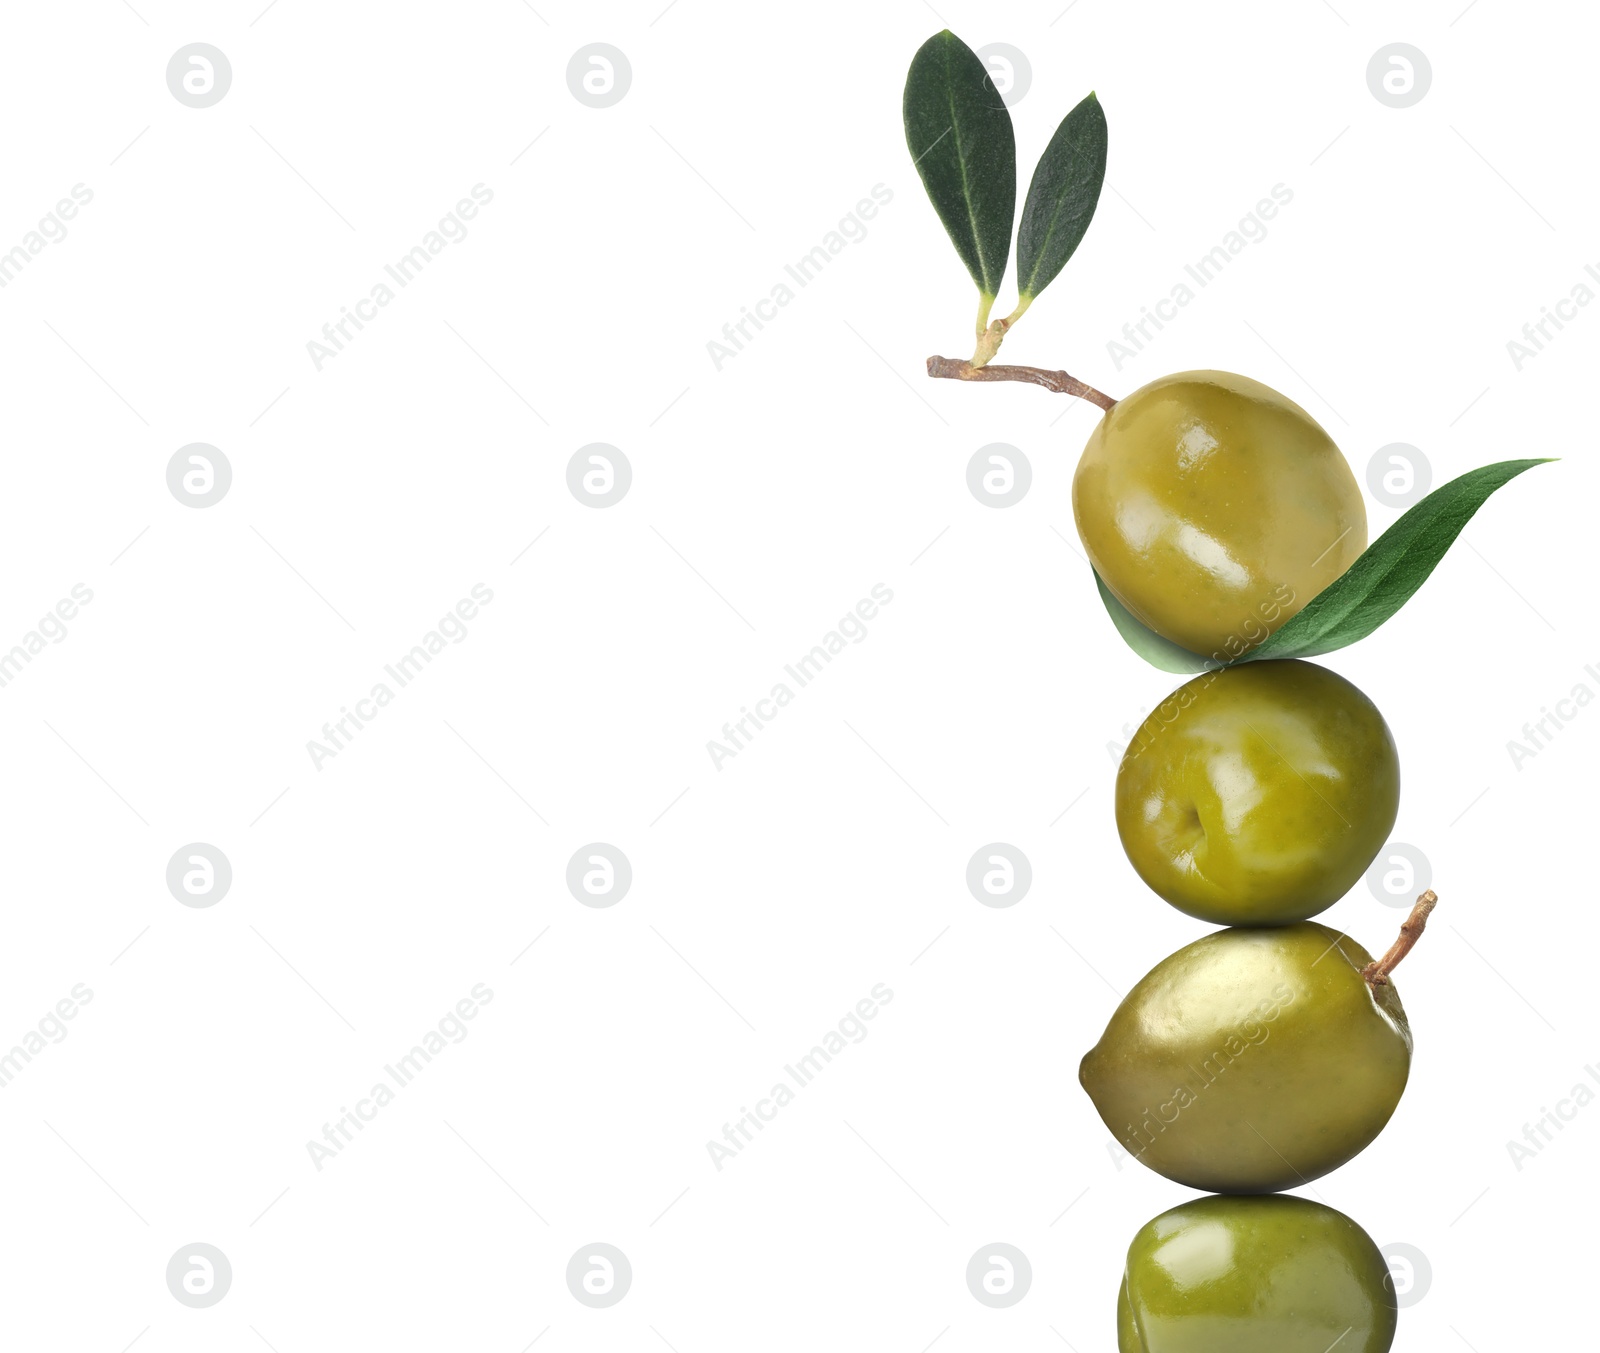 Image of Stack of whole green olives with leaves on white background